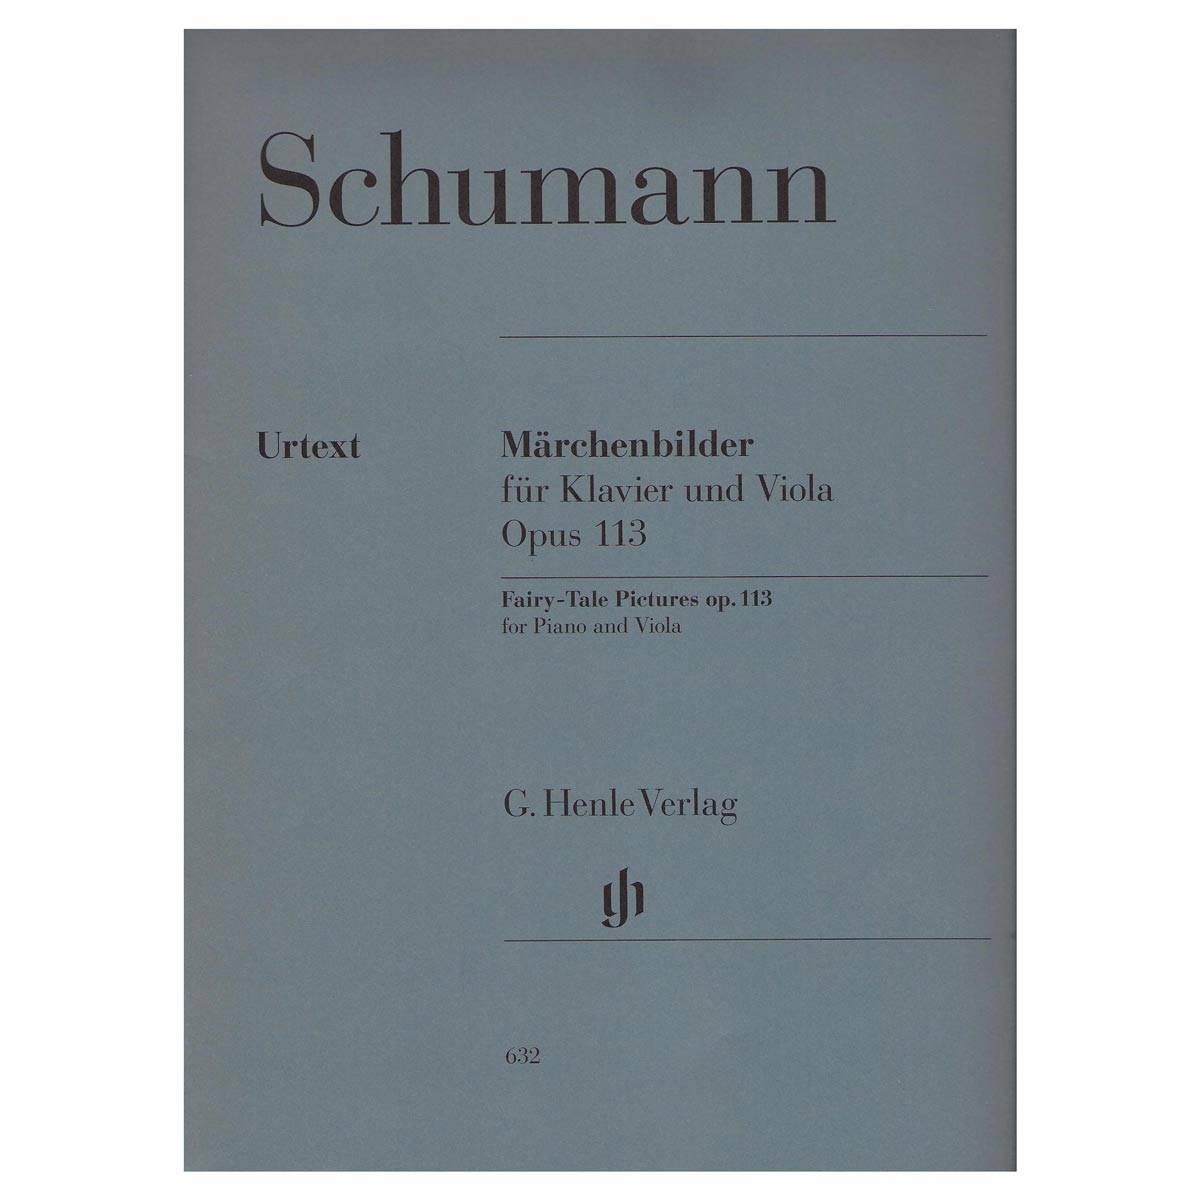 Schumann - Fairy-Tale Pictures Op.113 for Piano & Viola